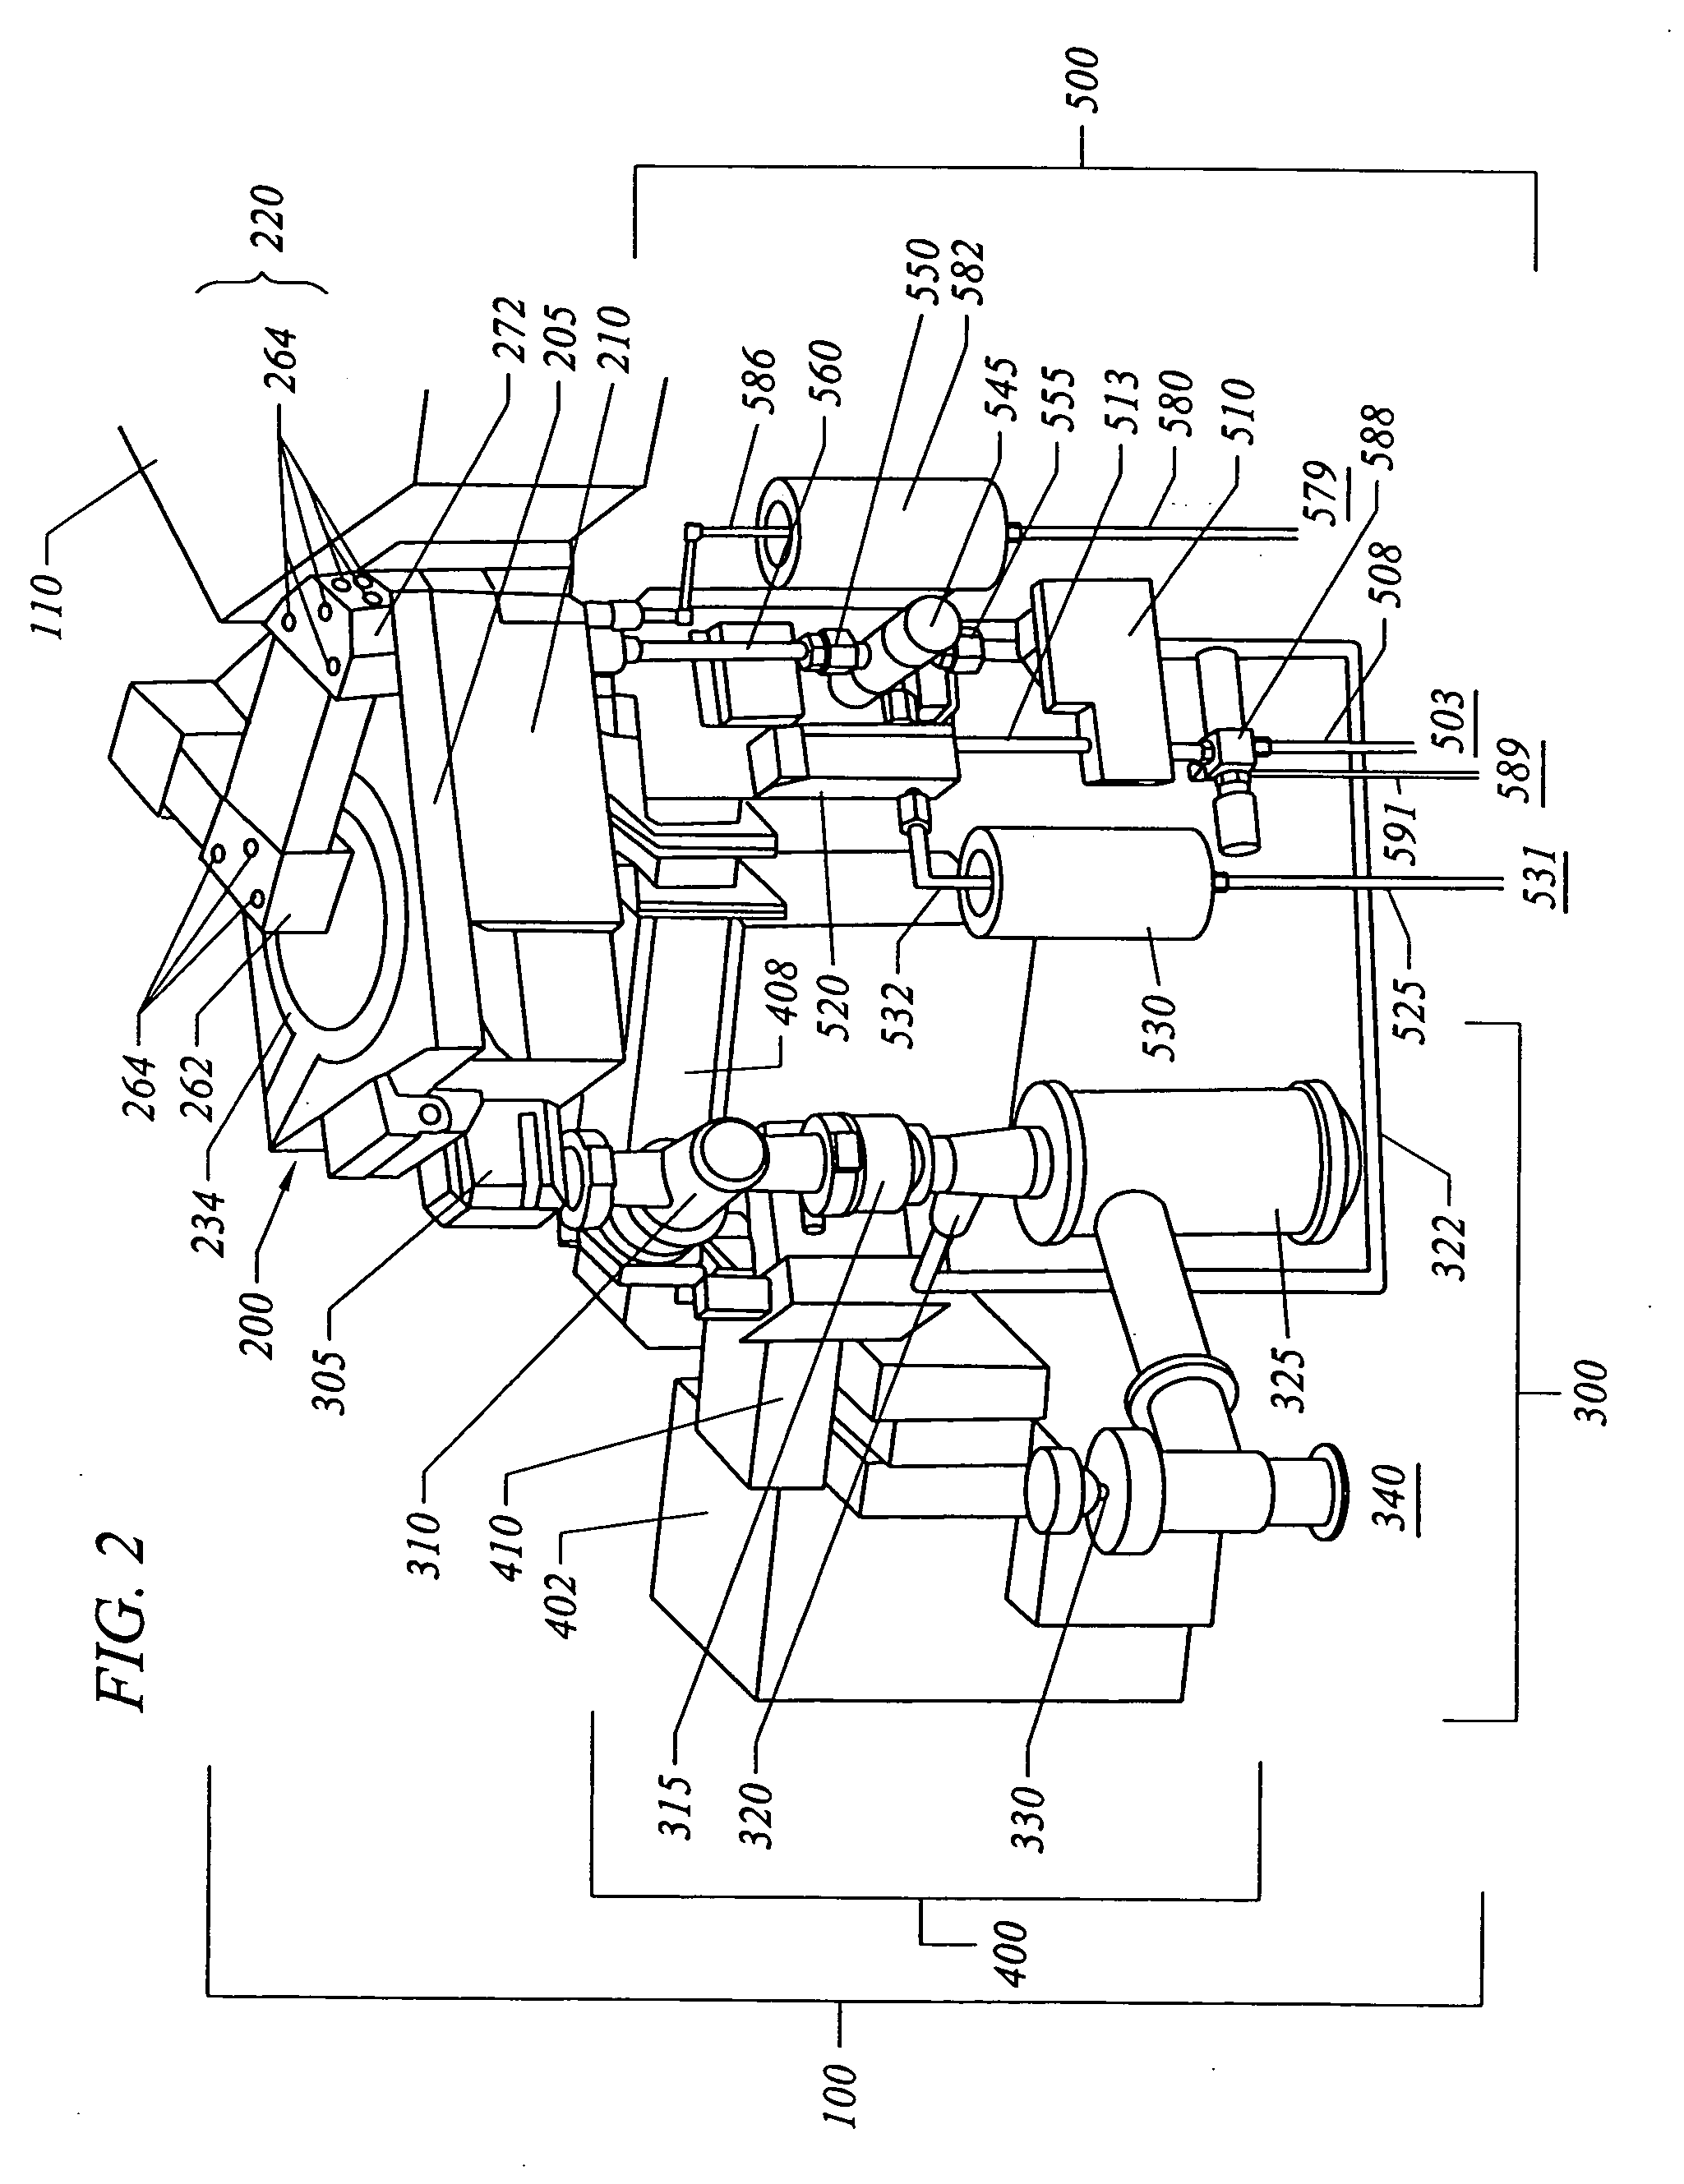 Apparatus for the deposition of high dielectric constant films